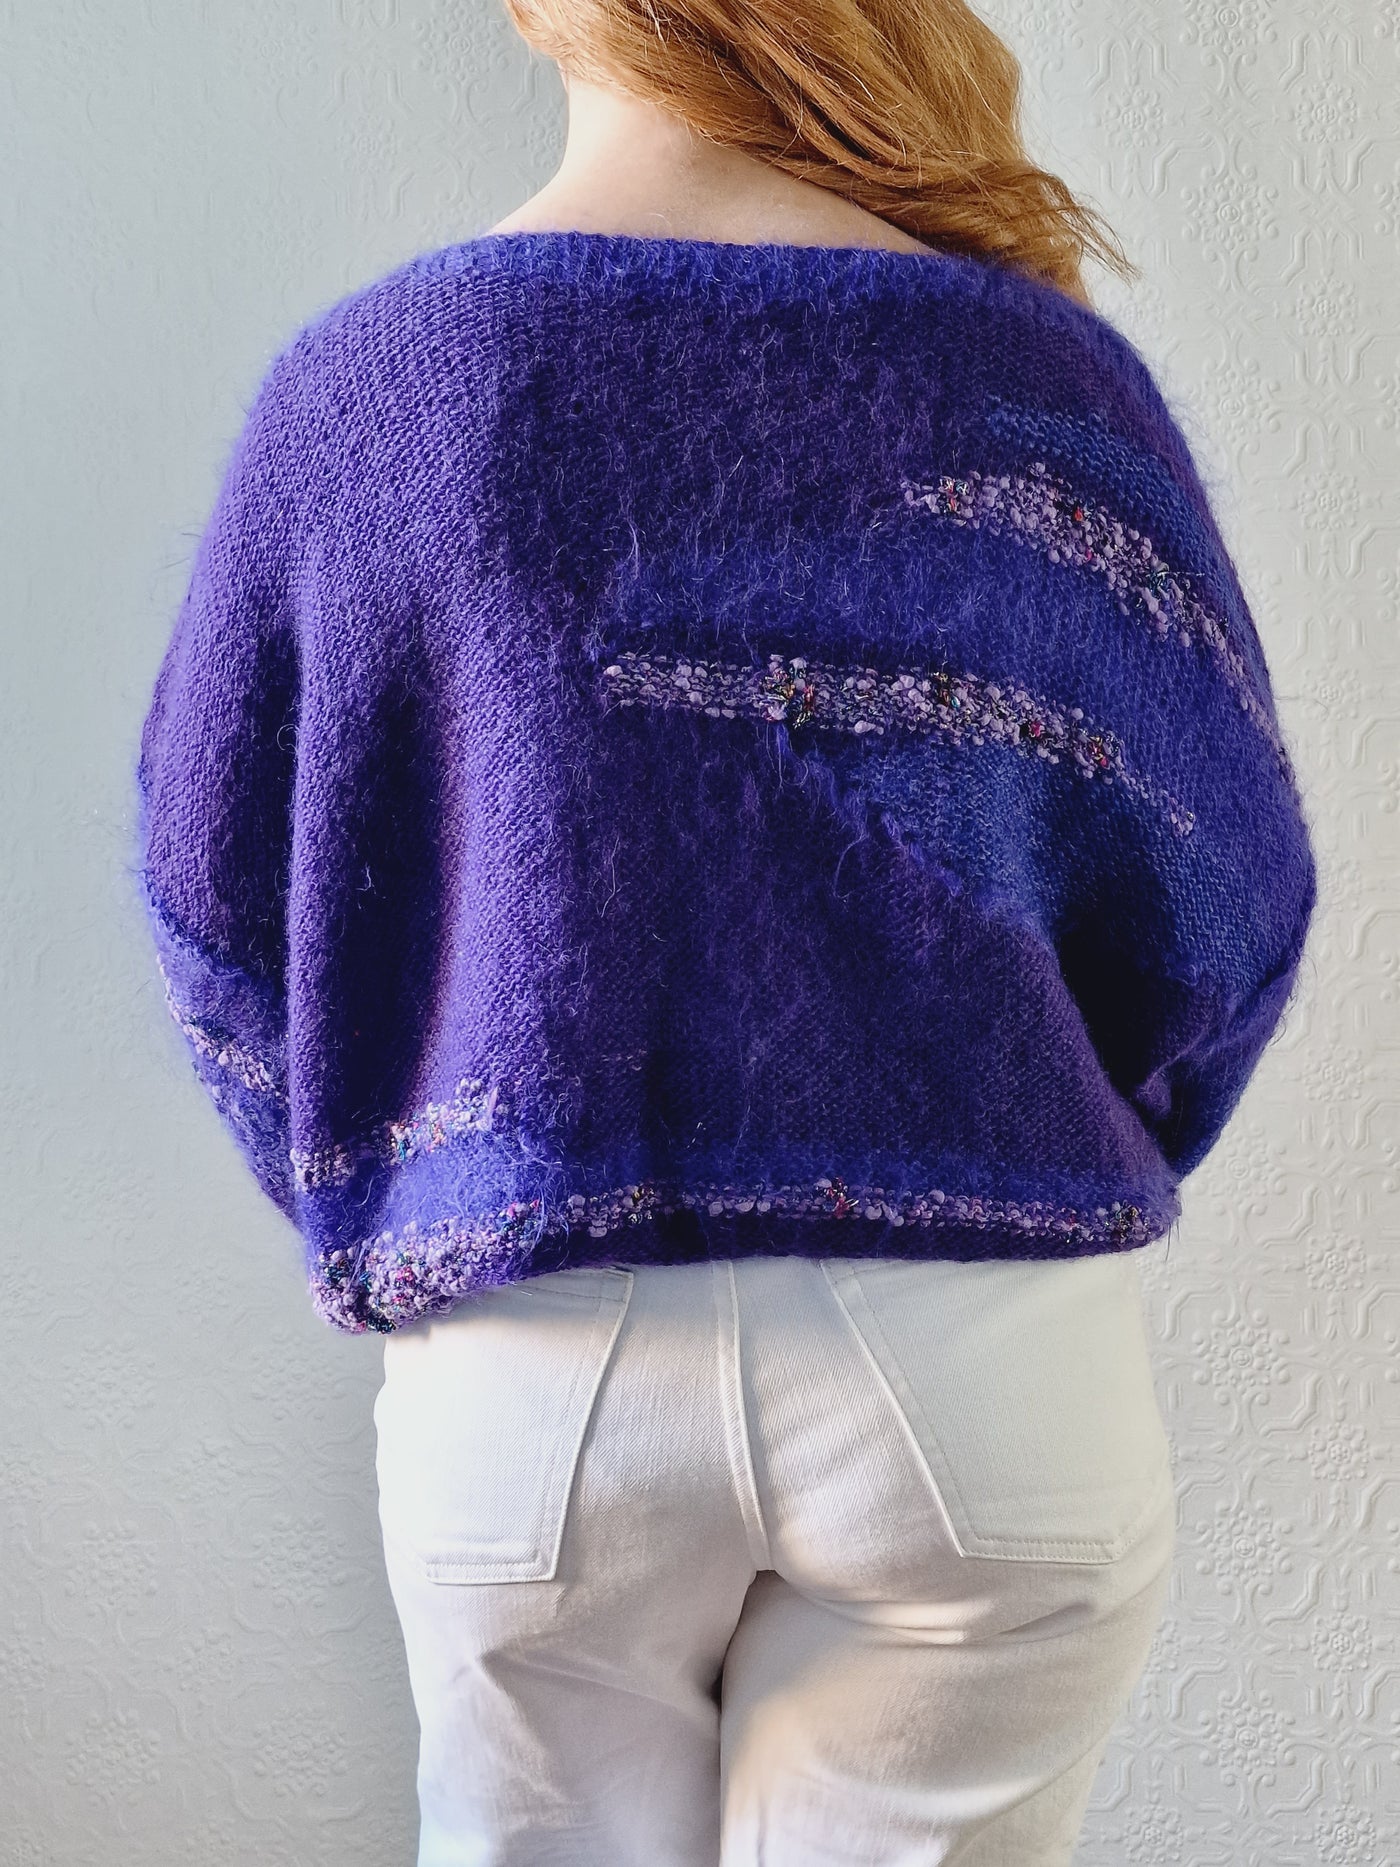 Vintage 80s Deep Purple Mohair Jumper with Boat Neck - XL